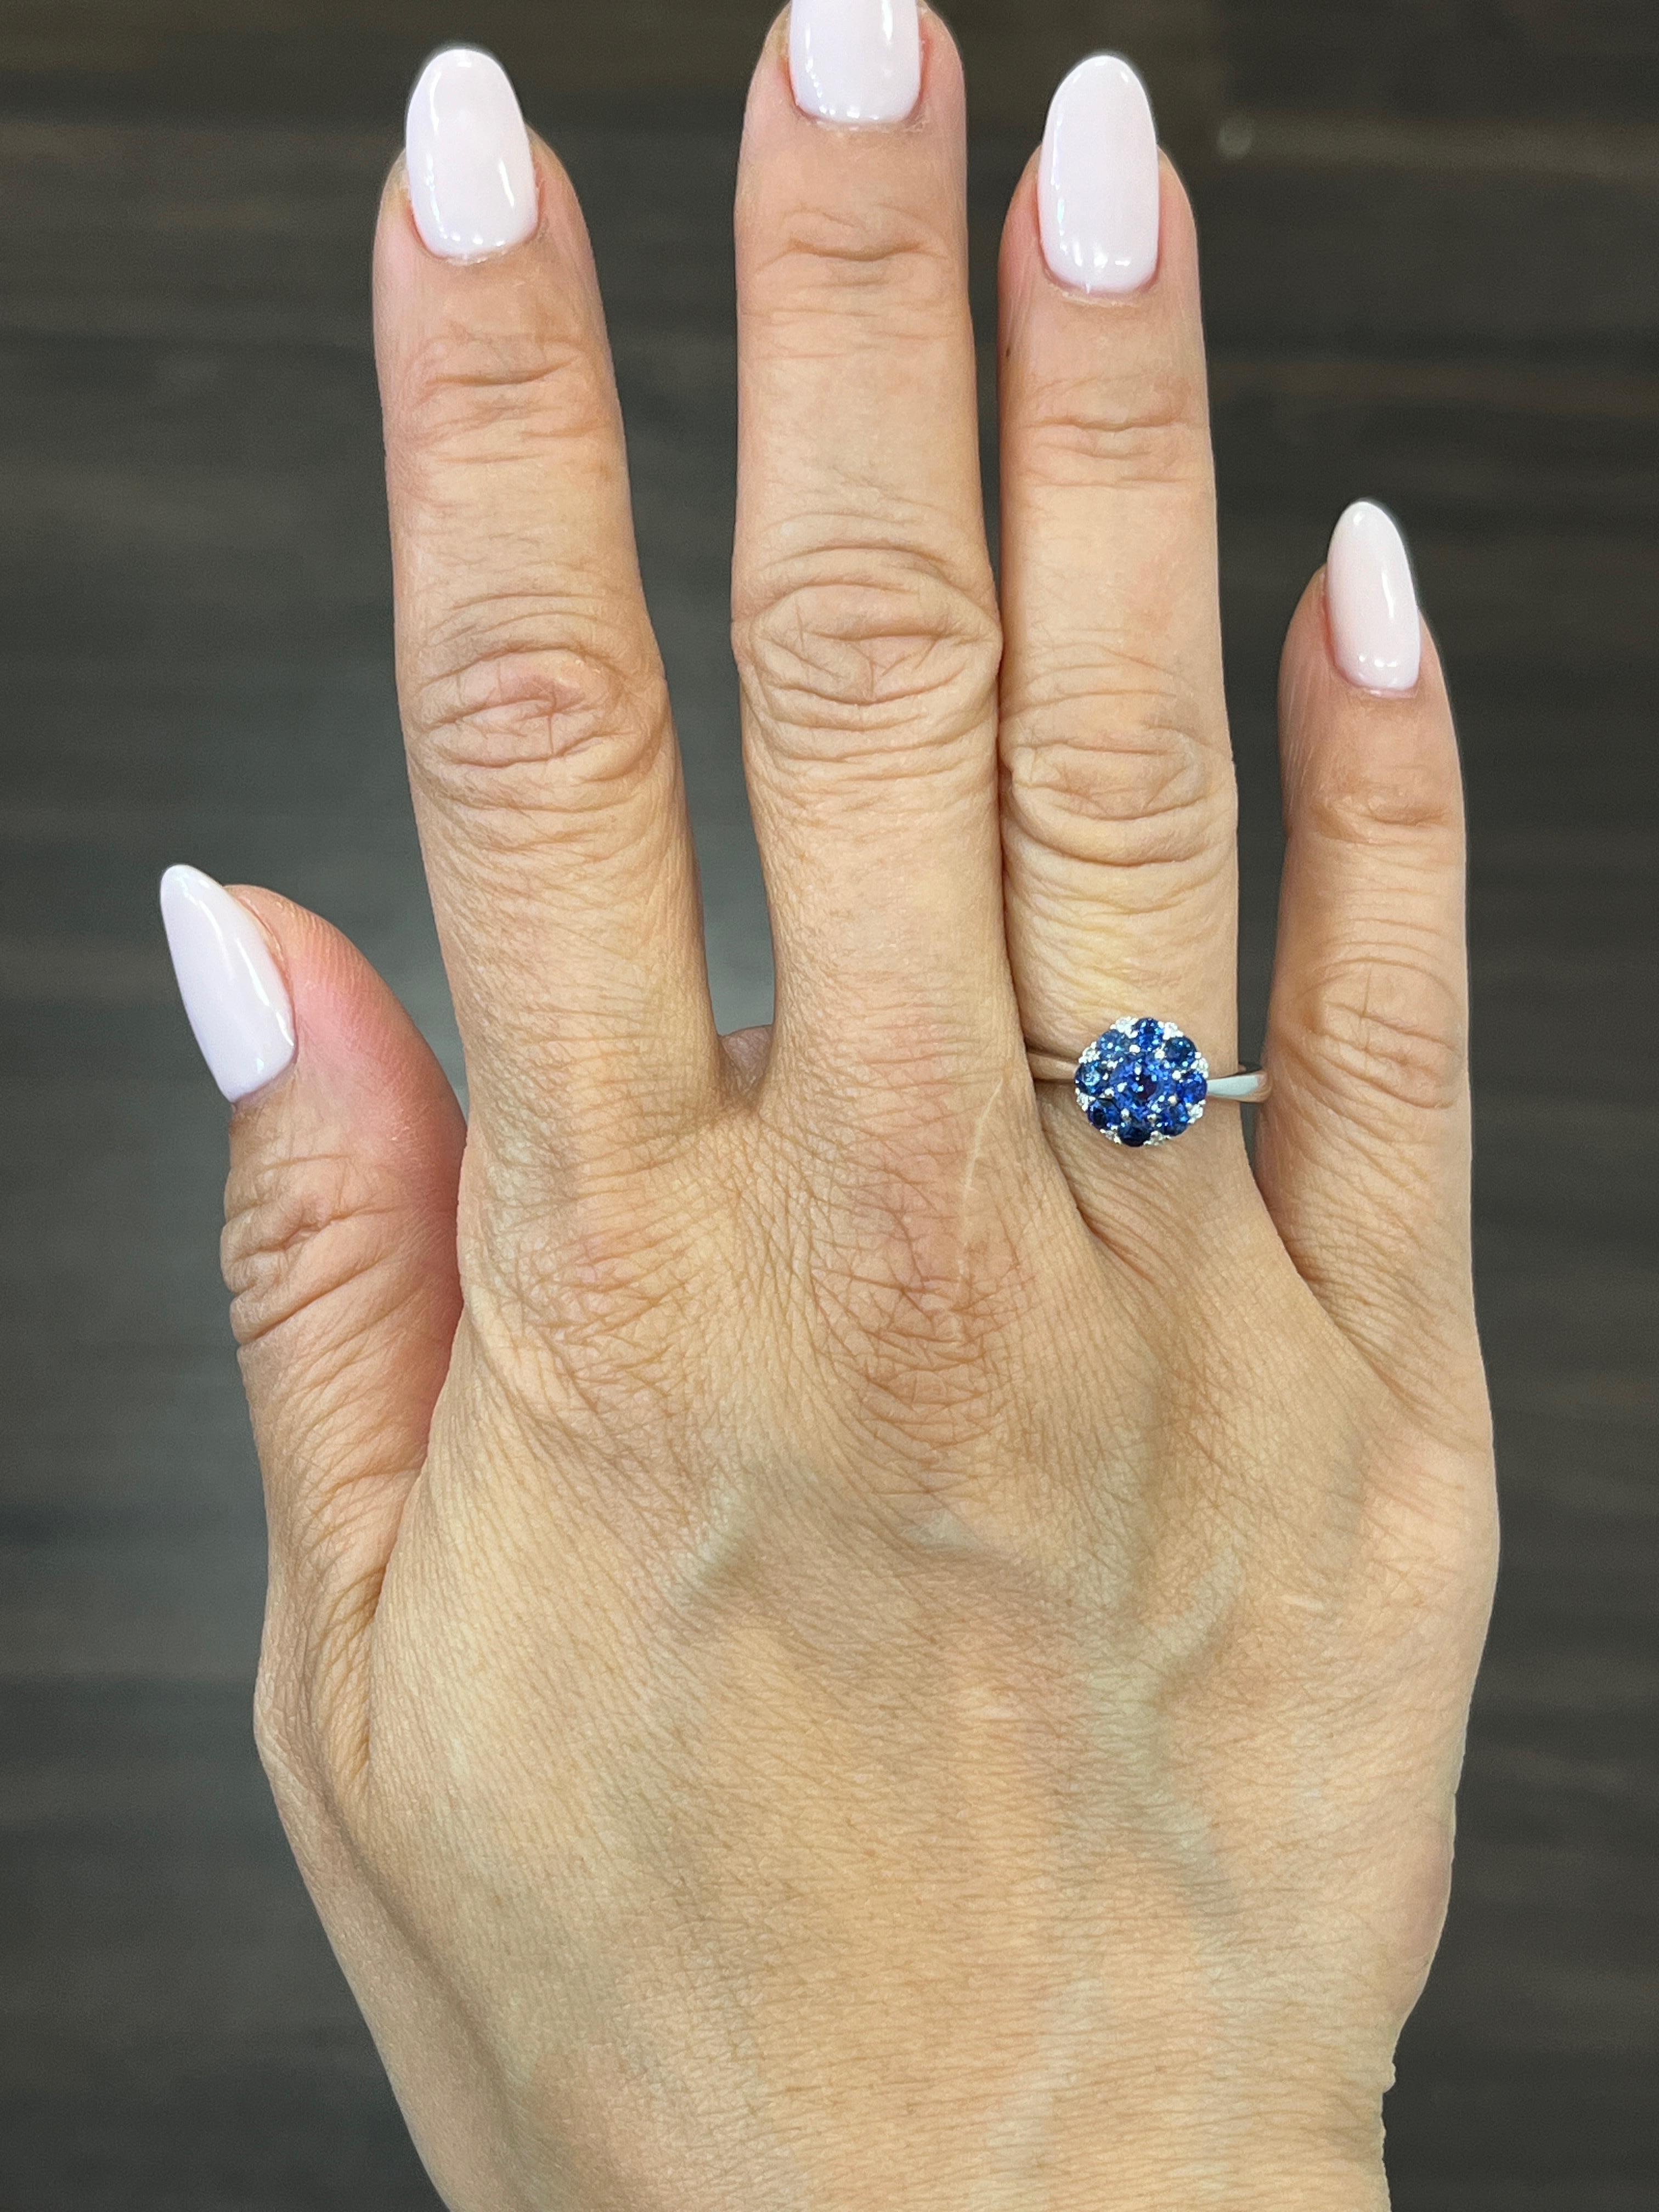 This beautiful 18k natural sapphire and diamond ring weighs 1.13 ct. It features 9 blue sapphires weighing 1.08 ct. The natural sapphires are AAA quality, and the diamonds are F/G in color and VS1 in clarity. A gorgeous addition to any wardrobe. 